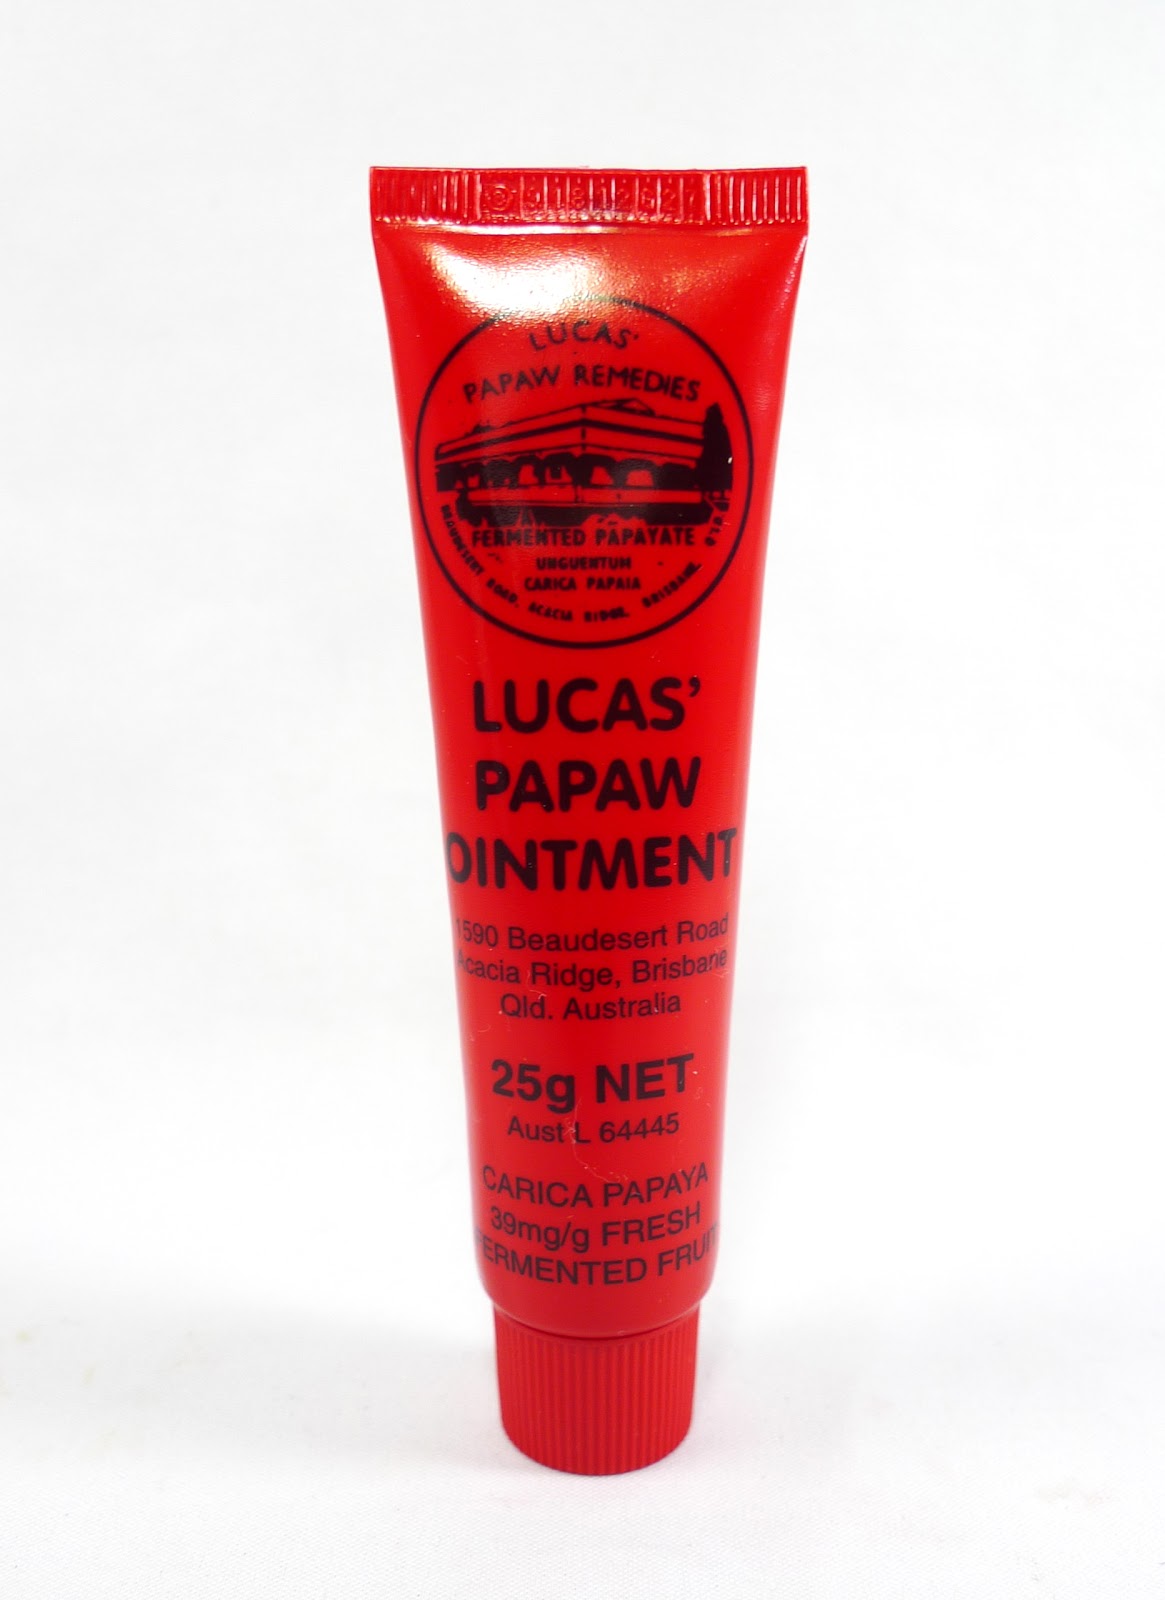 Review: Lucas' Papaw Ointment